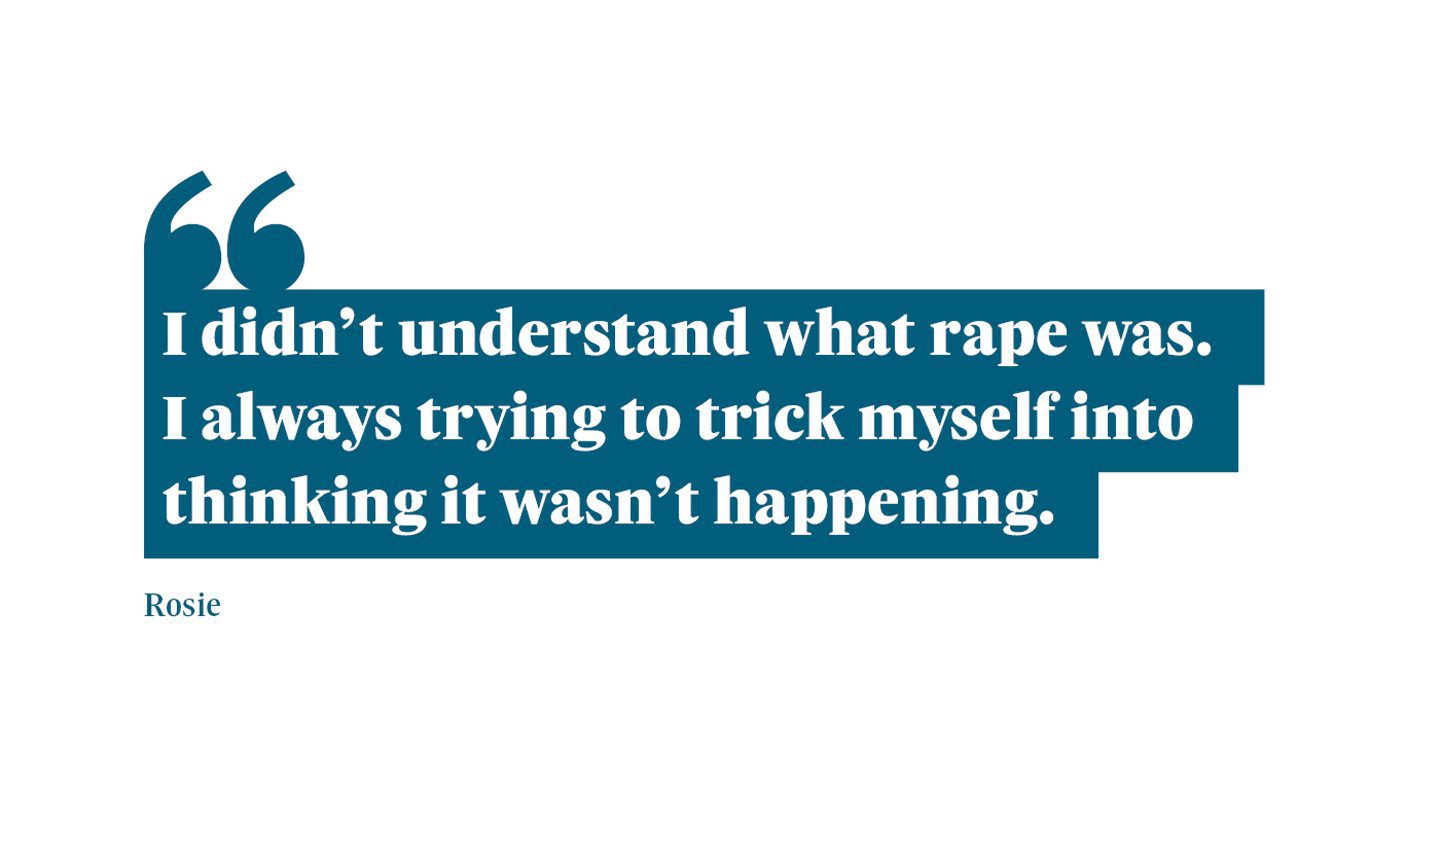 A quote from Rosie which says: "I didn’t understand what rape was. I always trying to trick myself into thinking it wasn’t happening.”